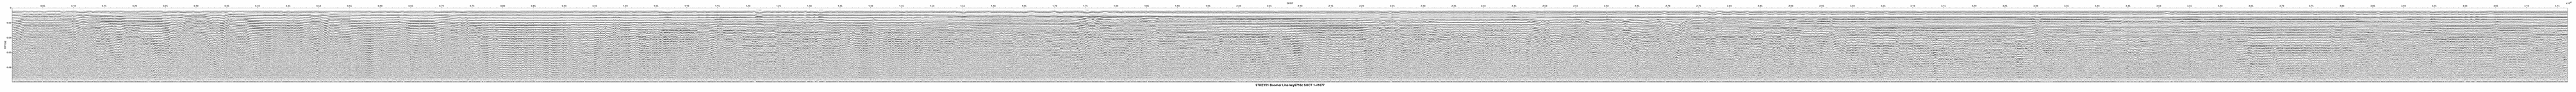 Thumbnail GIF image of the seismic trackline key9716c, with a hotlink to the more detailed, larger JPG image.